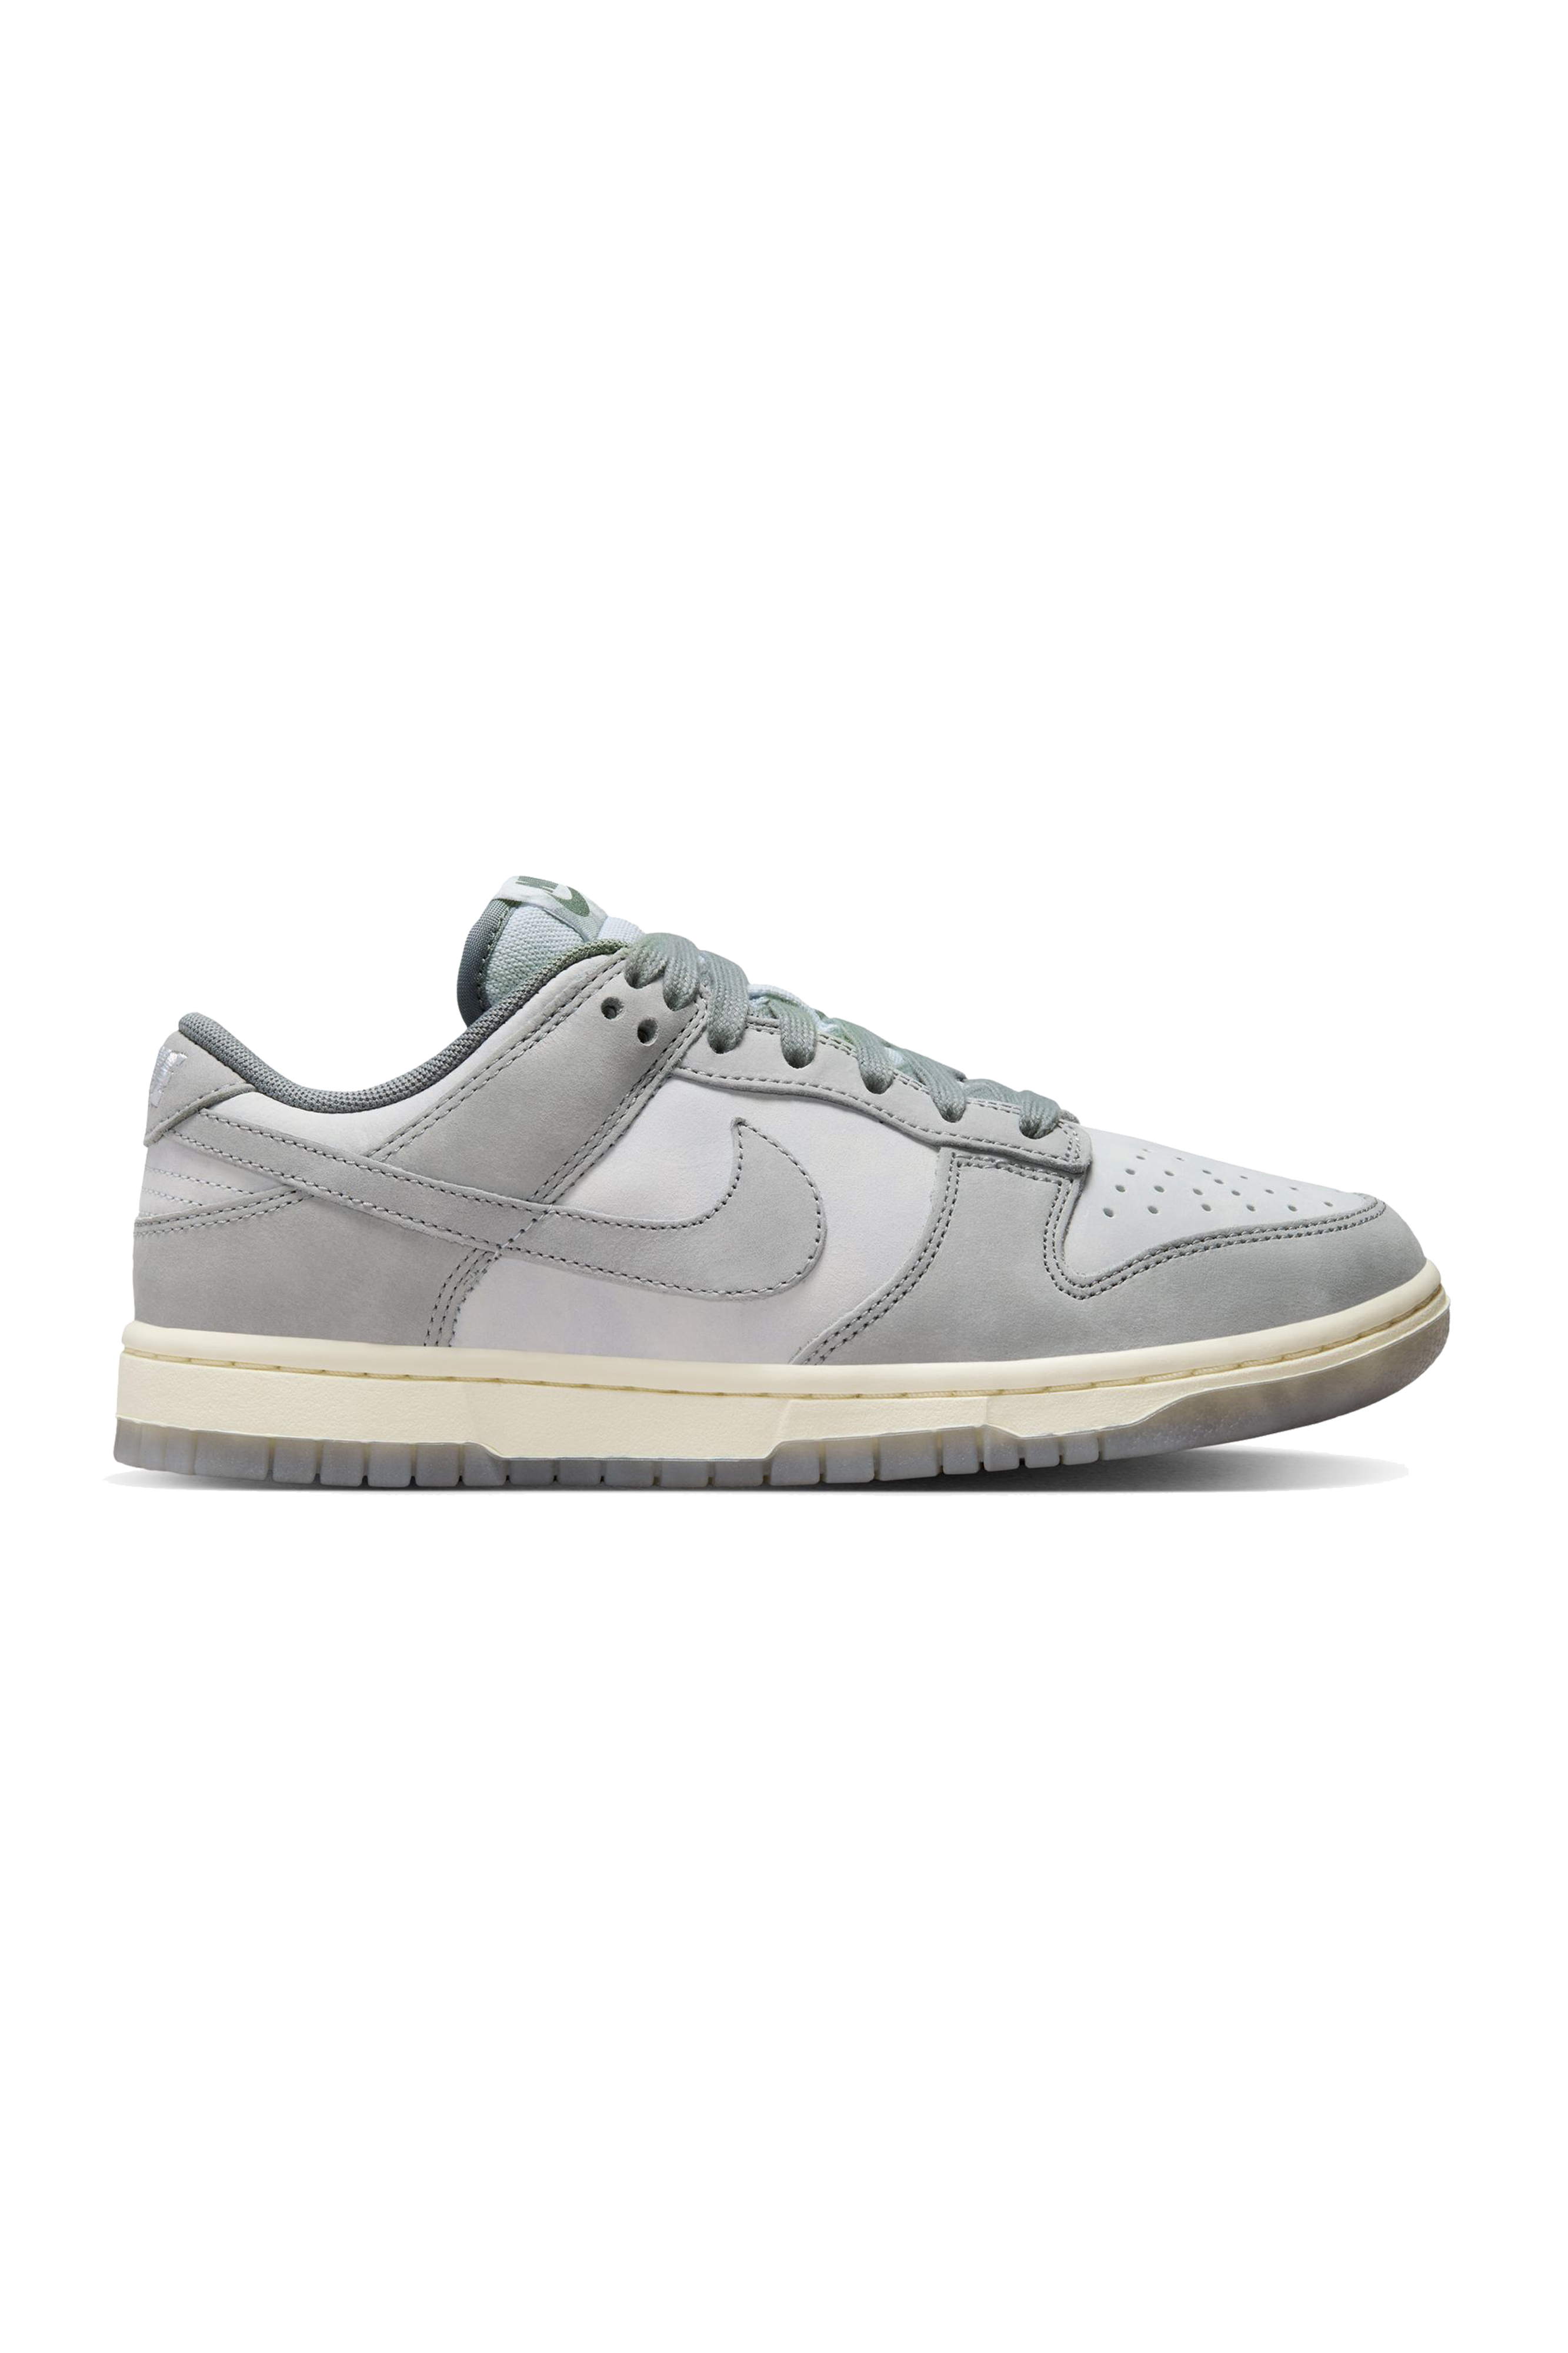 Wmns Dunk Low "Cool Grey"